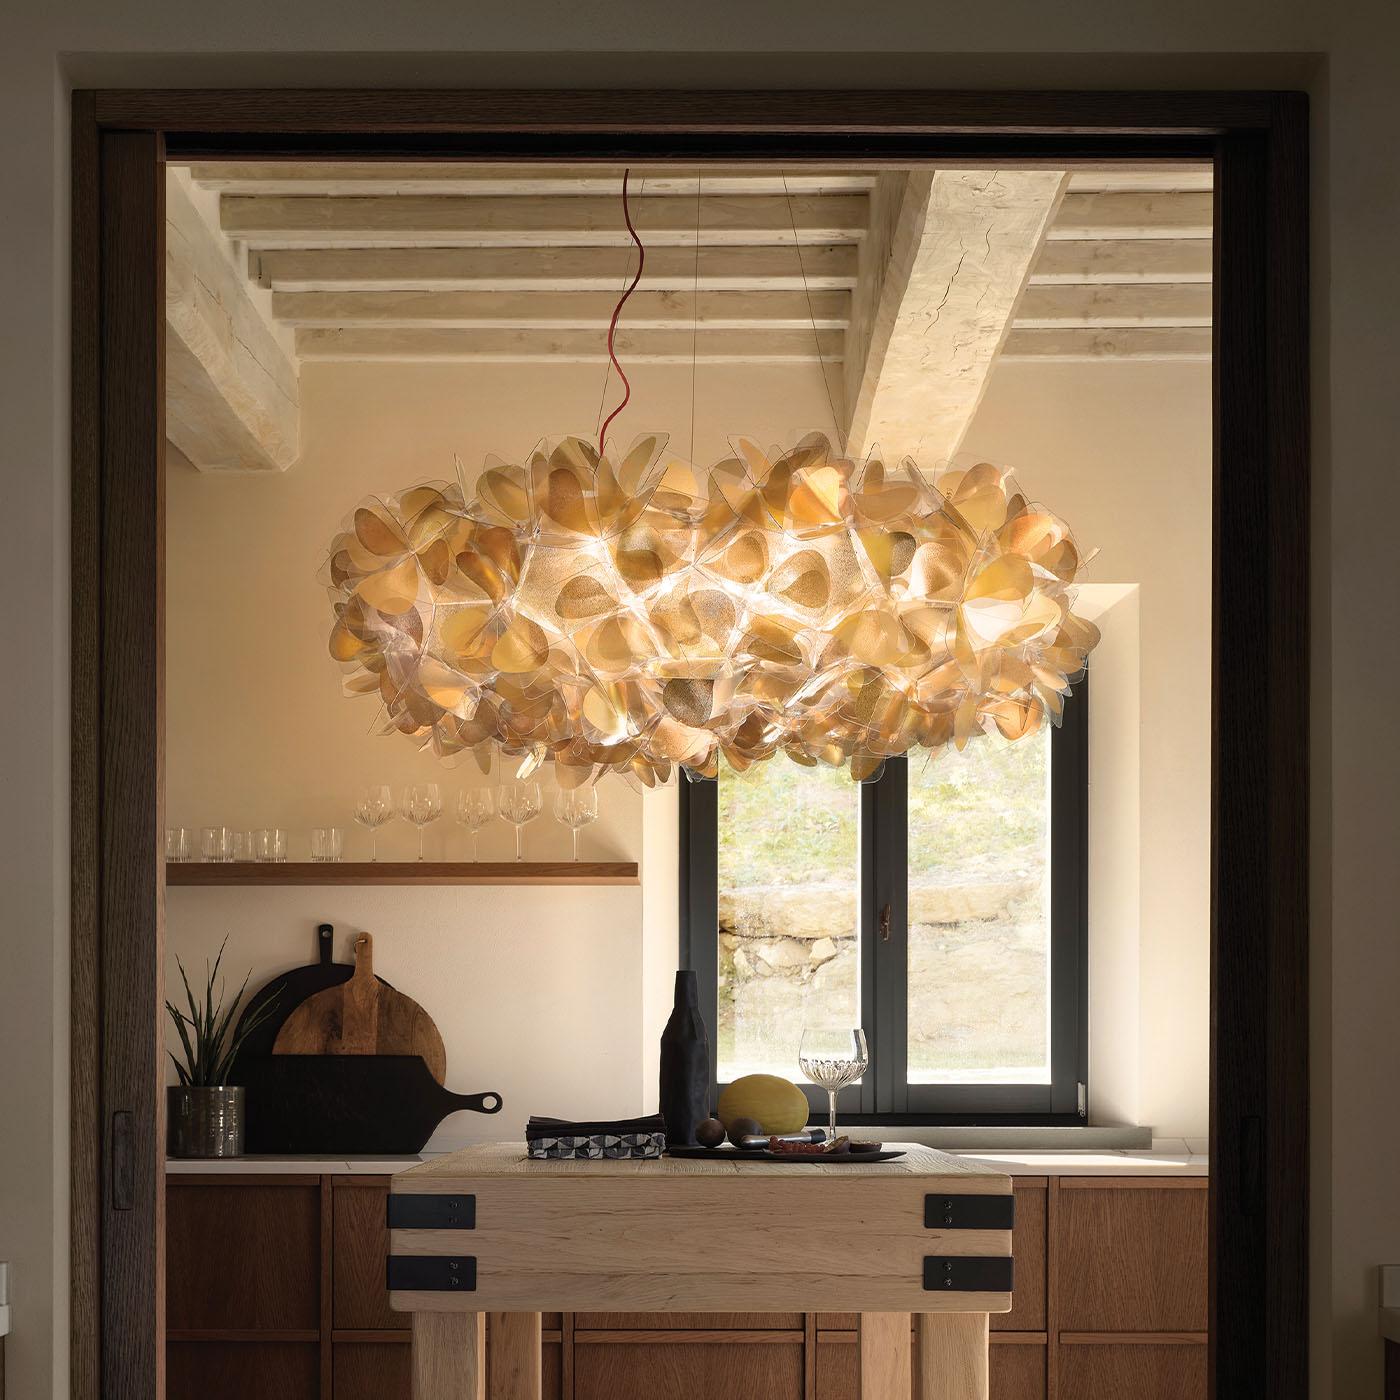 An ode to femininity and nature, this bouquet-like polycarbonate/cristalflex chandelier is sure to capture the eye in any interior decor. Its romantic aesthetic results from the cold application of two-faced golden foils to the technopolymer